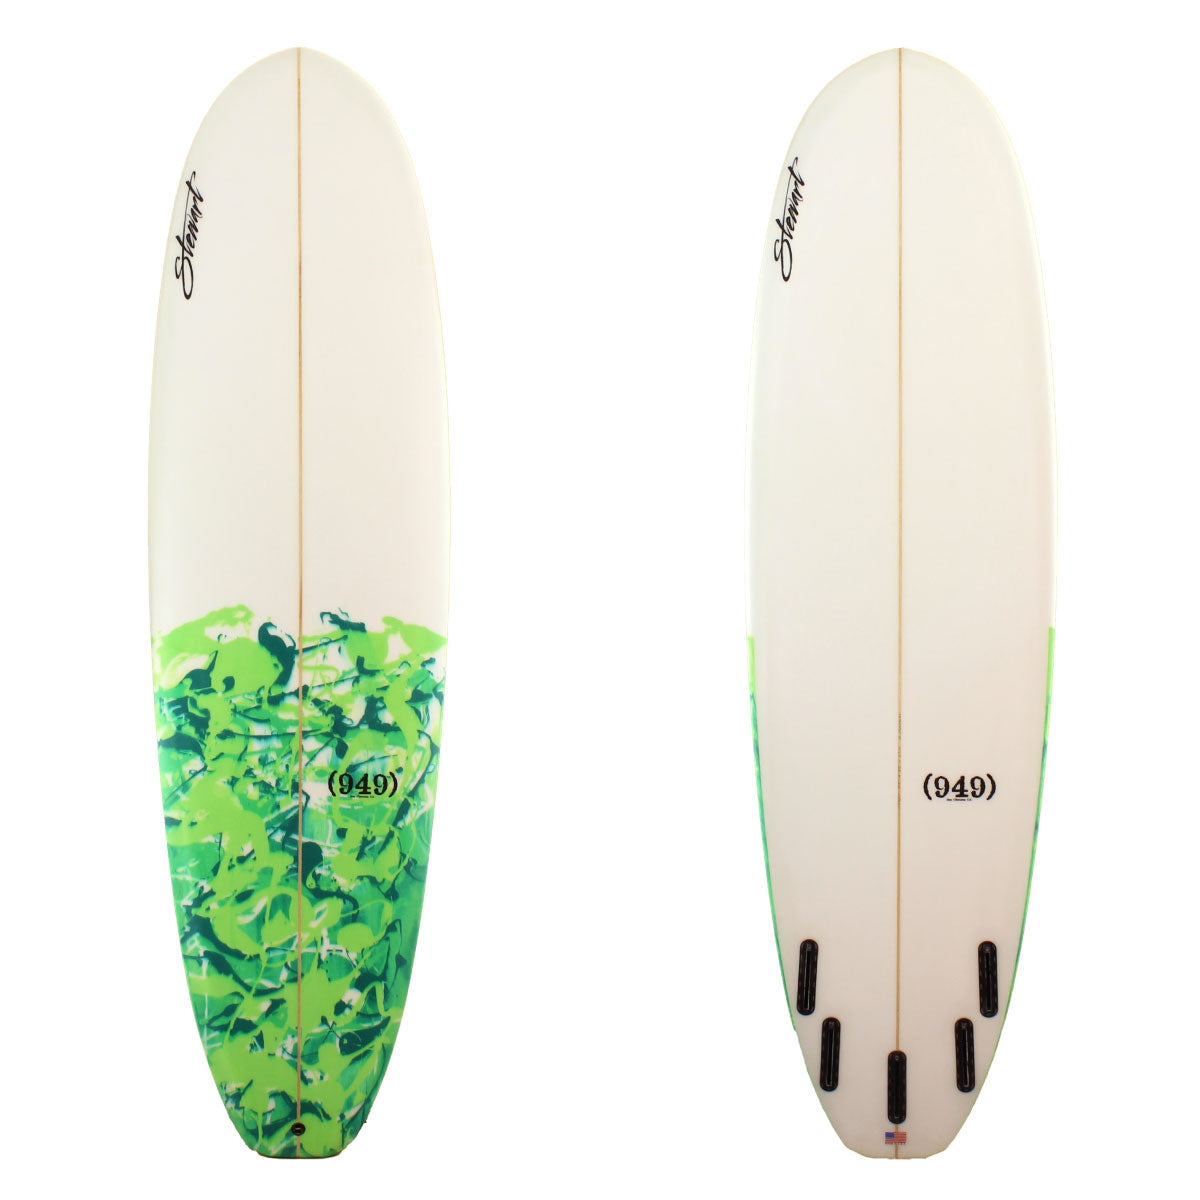 Stewart Surfboards 7'2" (949) mid-length surfboard with green swirl on tail of deck and clear white bottom